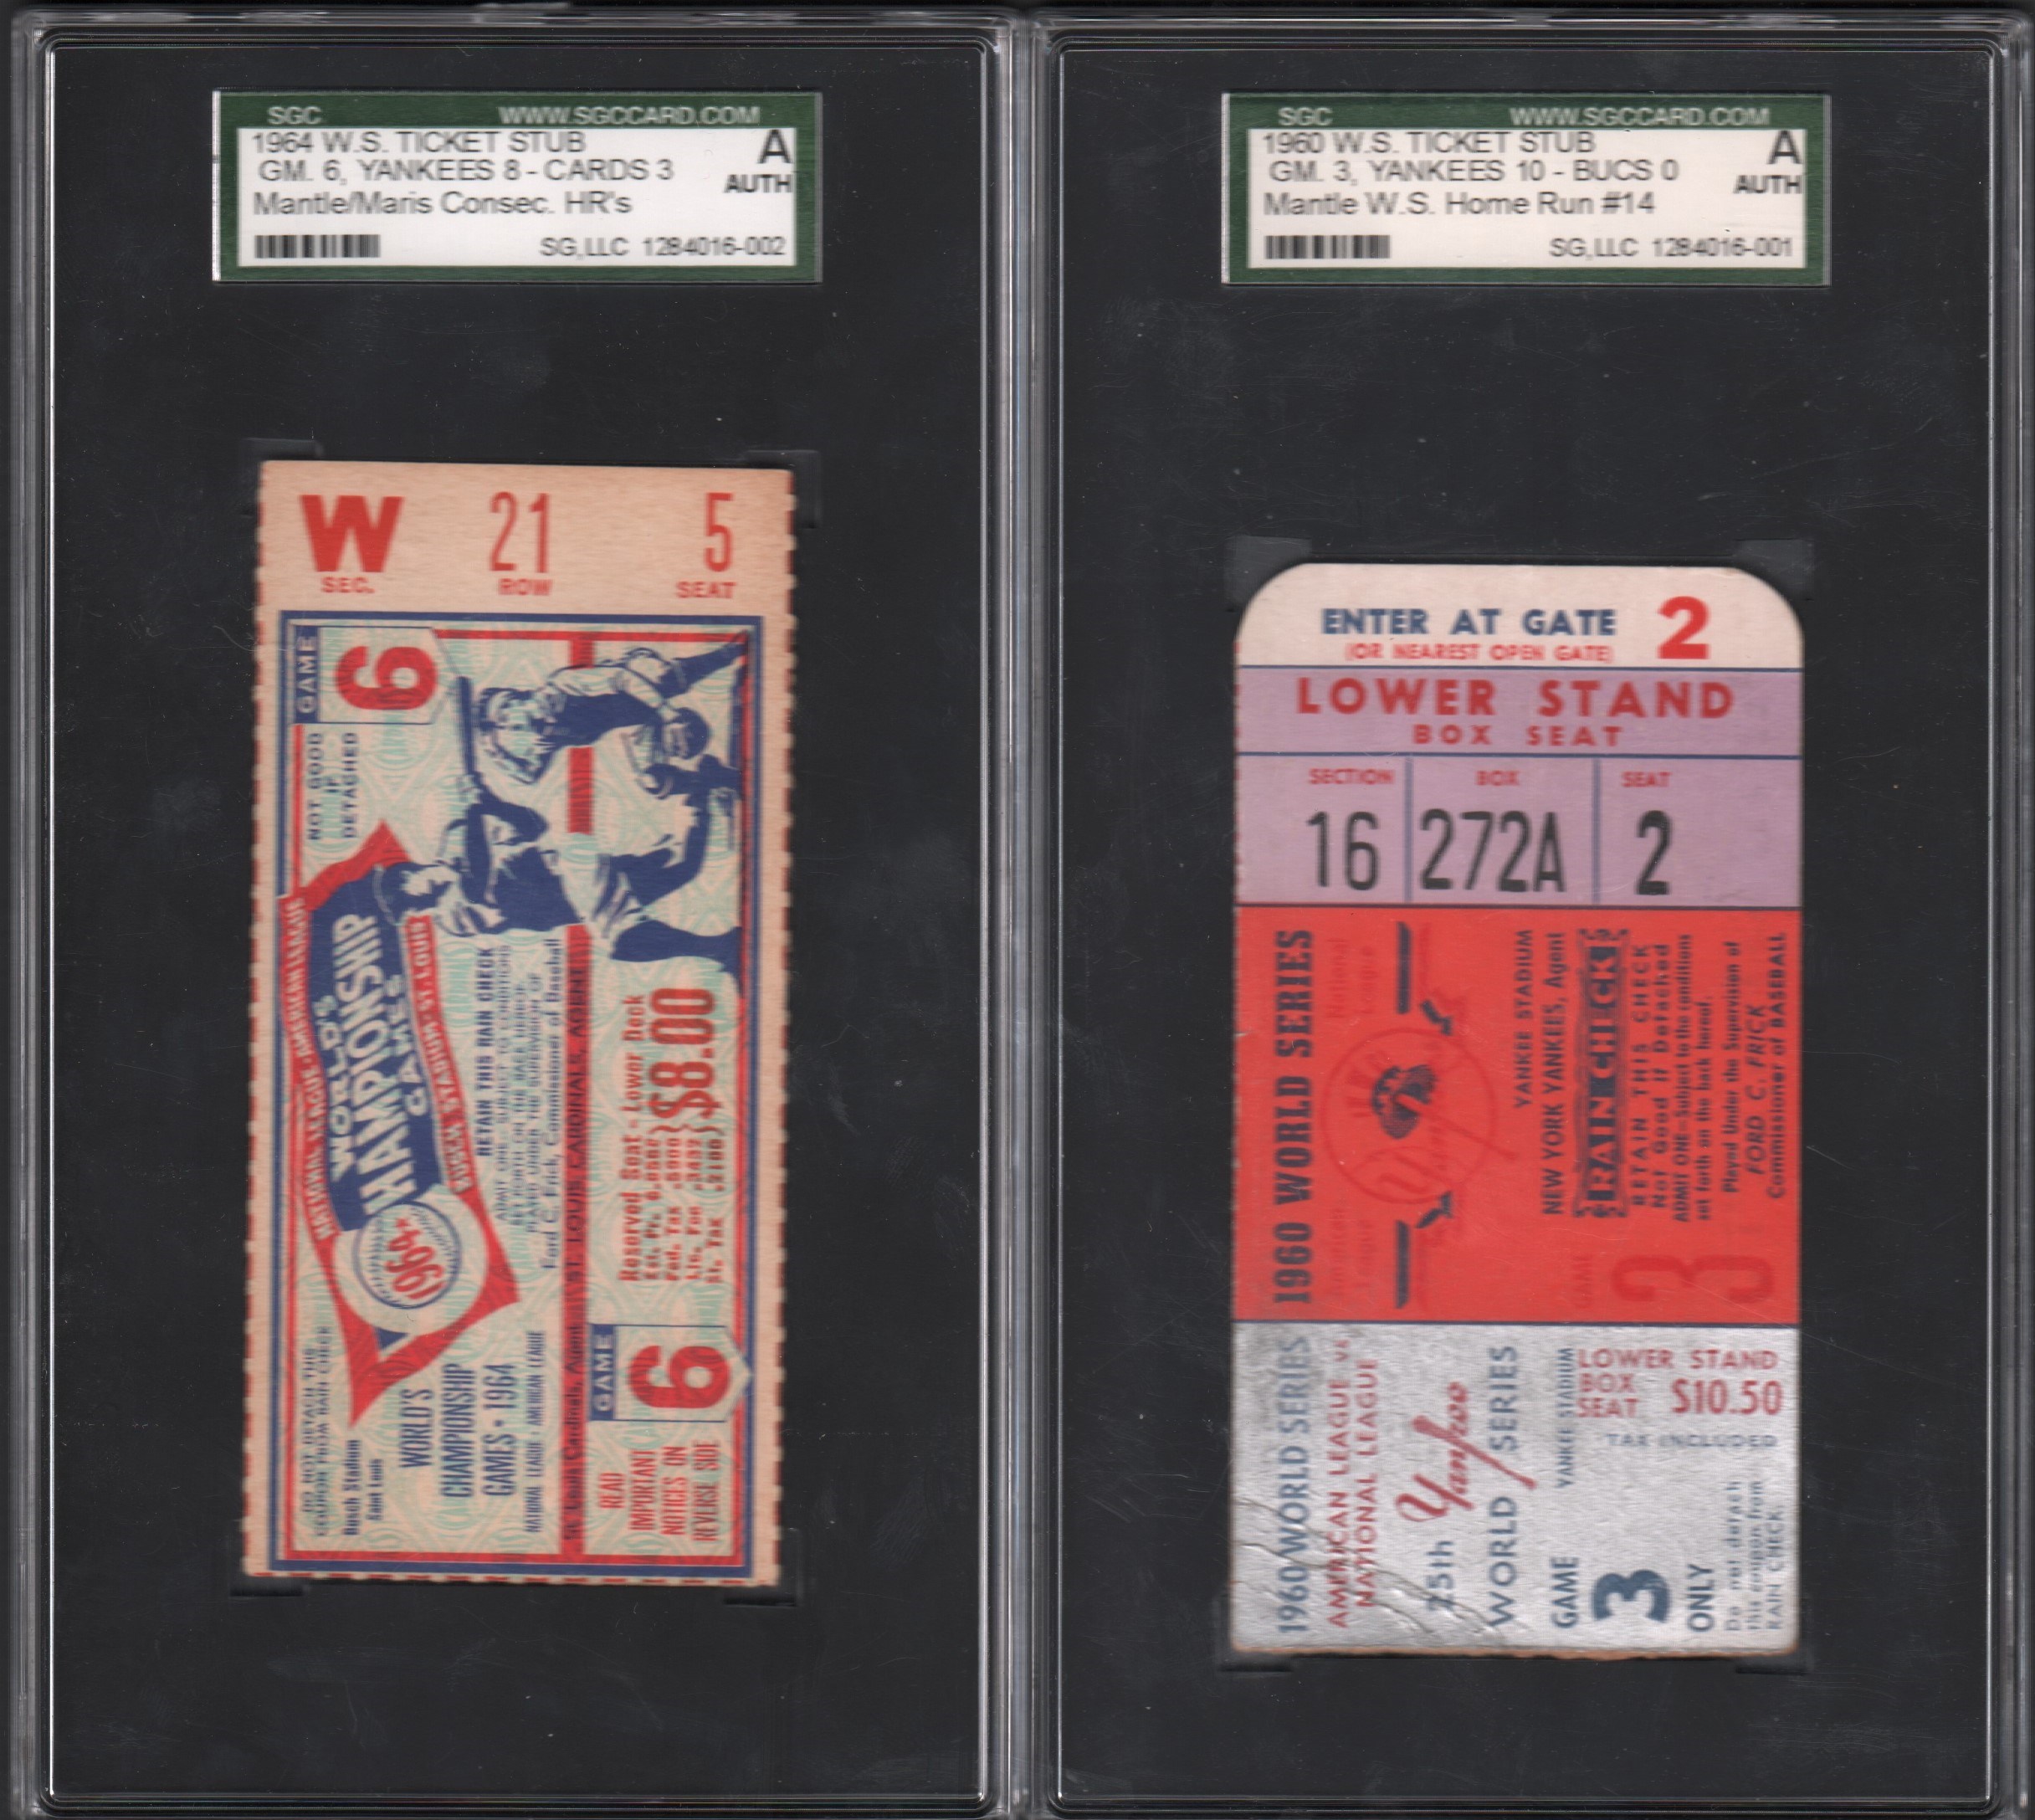 Baseball Publications and Tickets - World Series and All-Star Game Tickets (15)